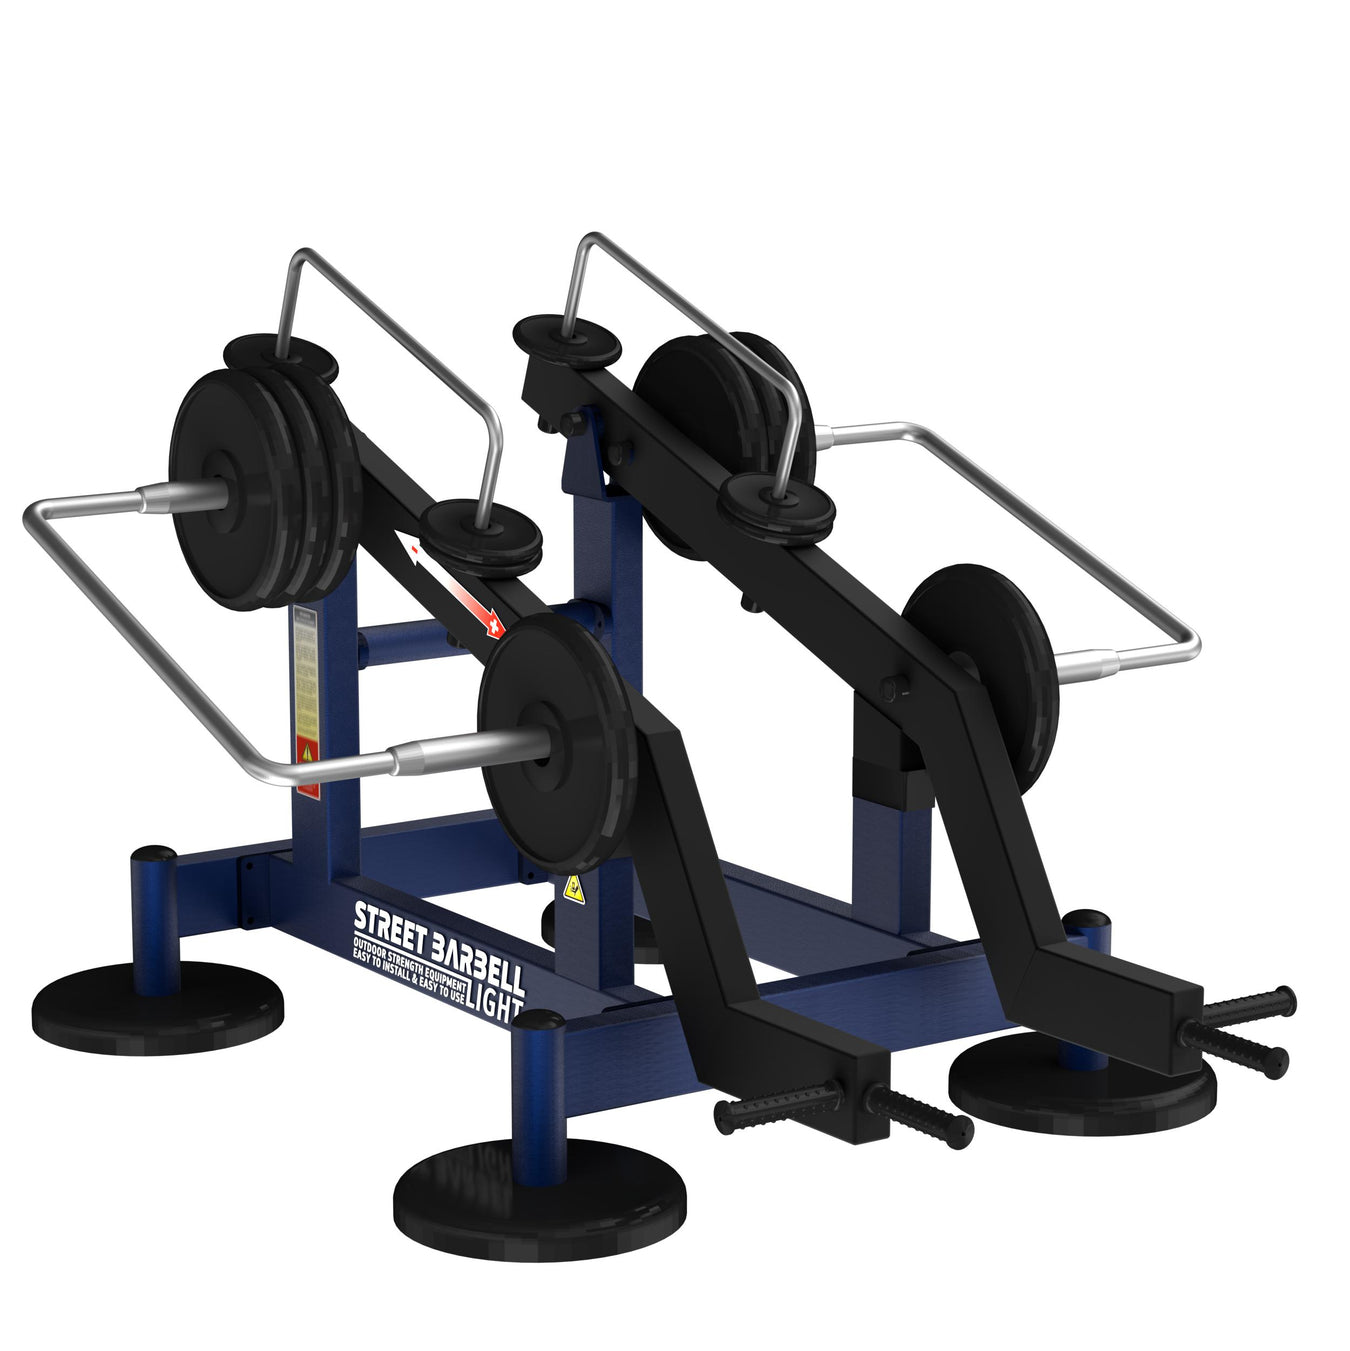 Outdoor Weightlifting Equipment For Sale